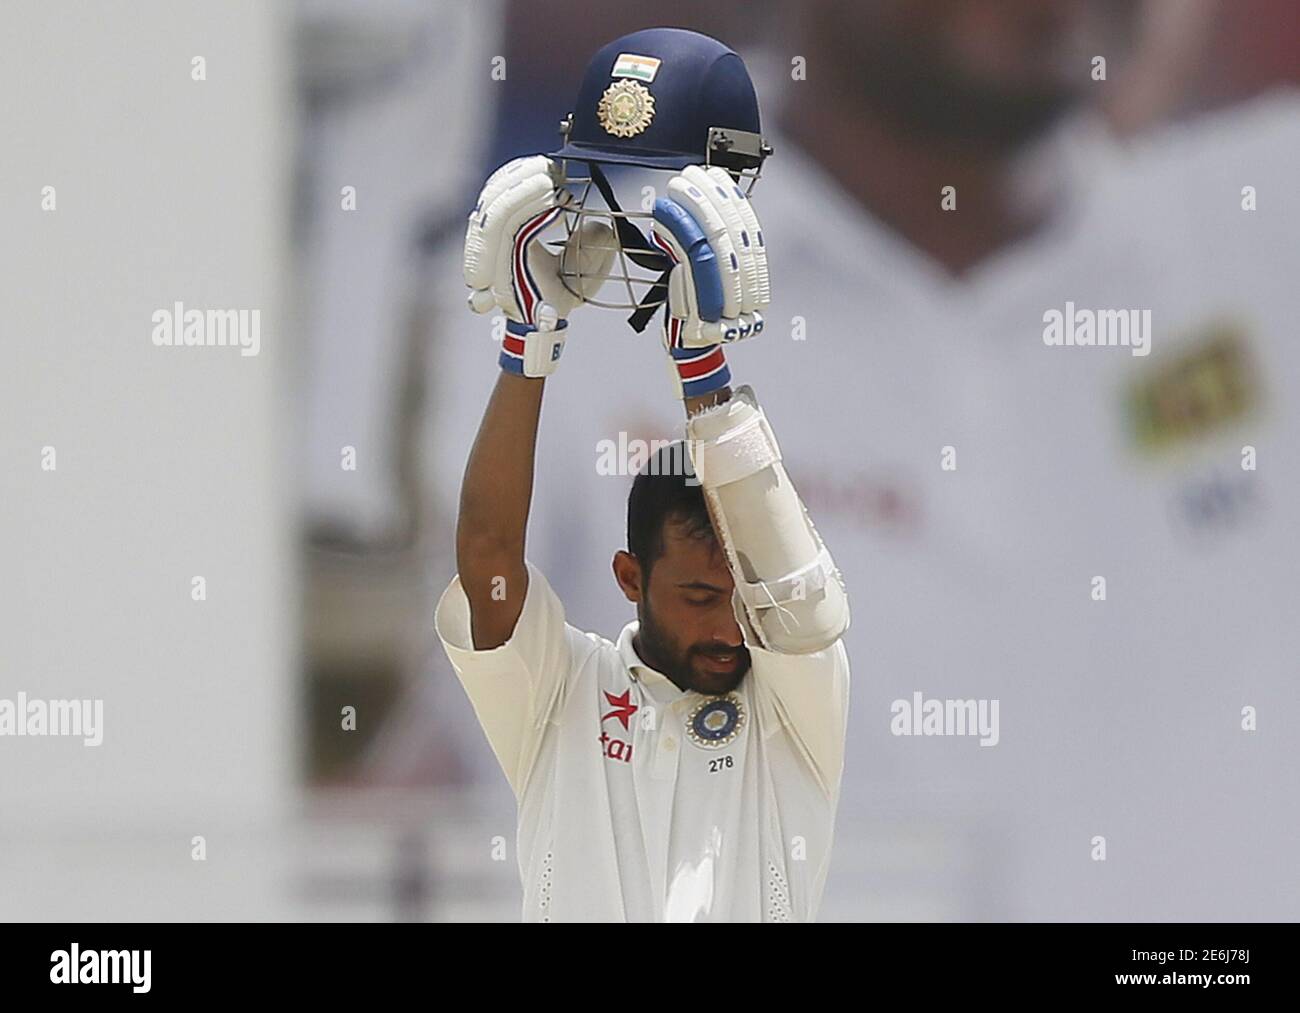 India's Ajinkya Rahane wipes his face during the fourth day of their second test cricket match against Sri Lanka in Colombo August 23, 2015. REUTERS/Dinuka Liyanawatte Stock Photo